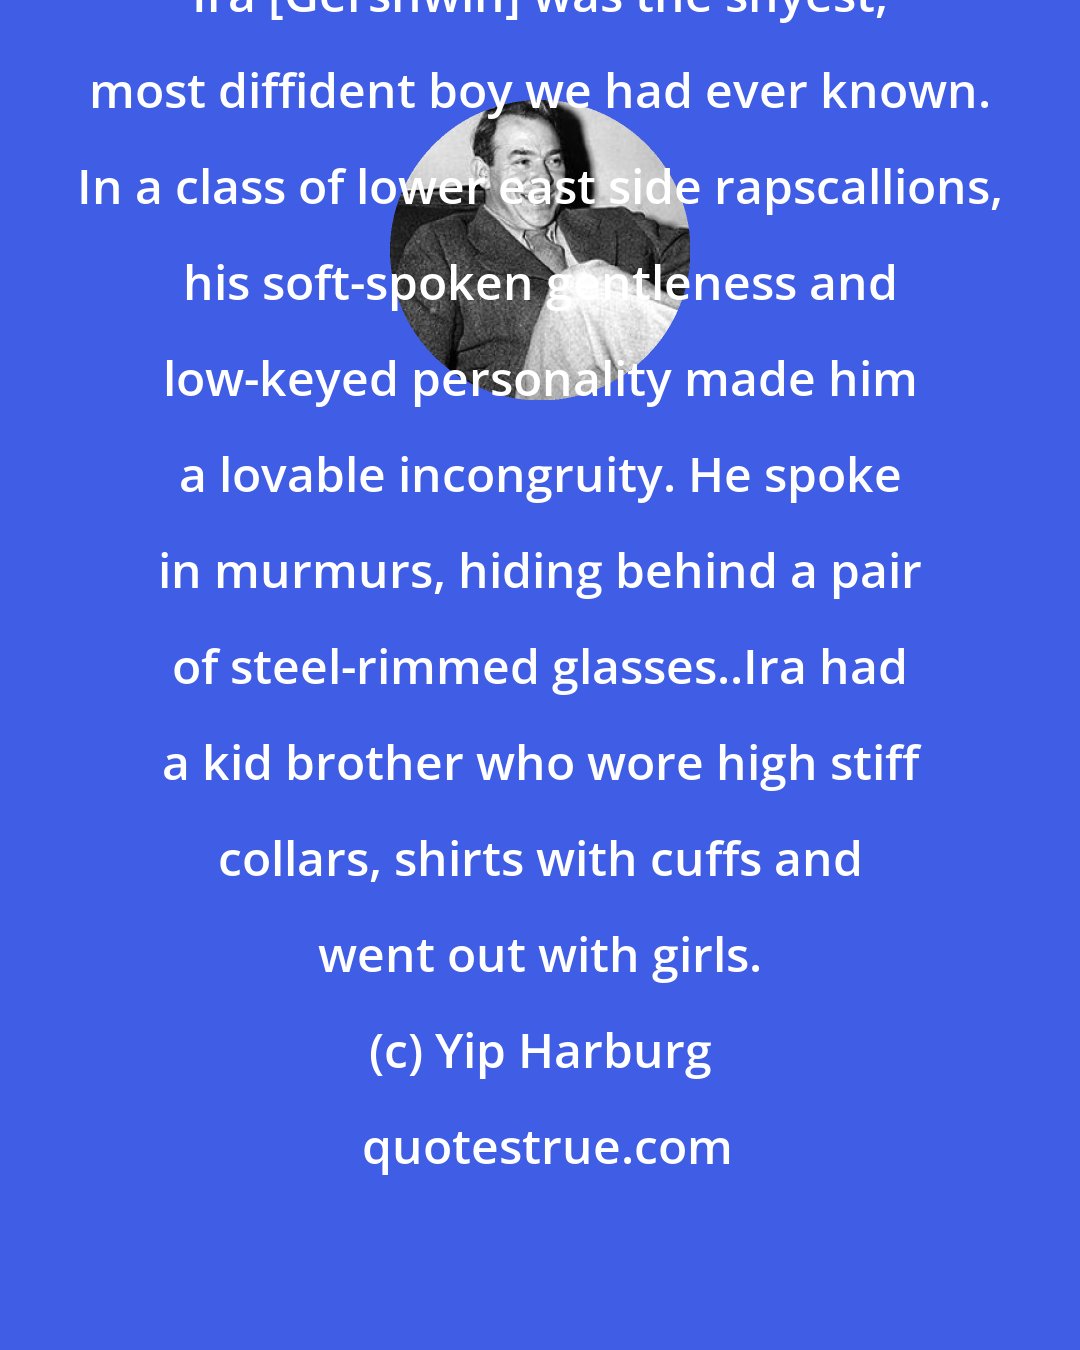 Yip Harburg: Ira [Gershwin] was the shyest, most diffident boy we had ever known. In a class of lower east side rapscallions, his soft-spoken gentleness and low-keyed personality made him a lovable incongruity. He spoke in murmurs, hiding behind a pair of steel-rimmed glasses..Ira had a kid brother who wore high stiff collars, shirts with cuffs and went out with girls.